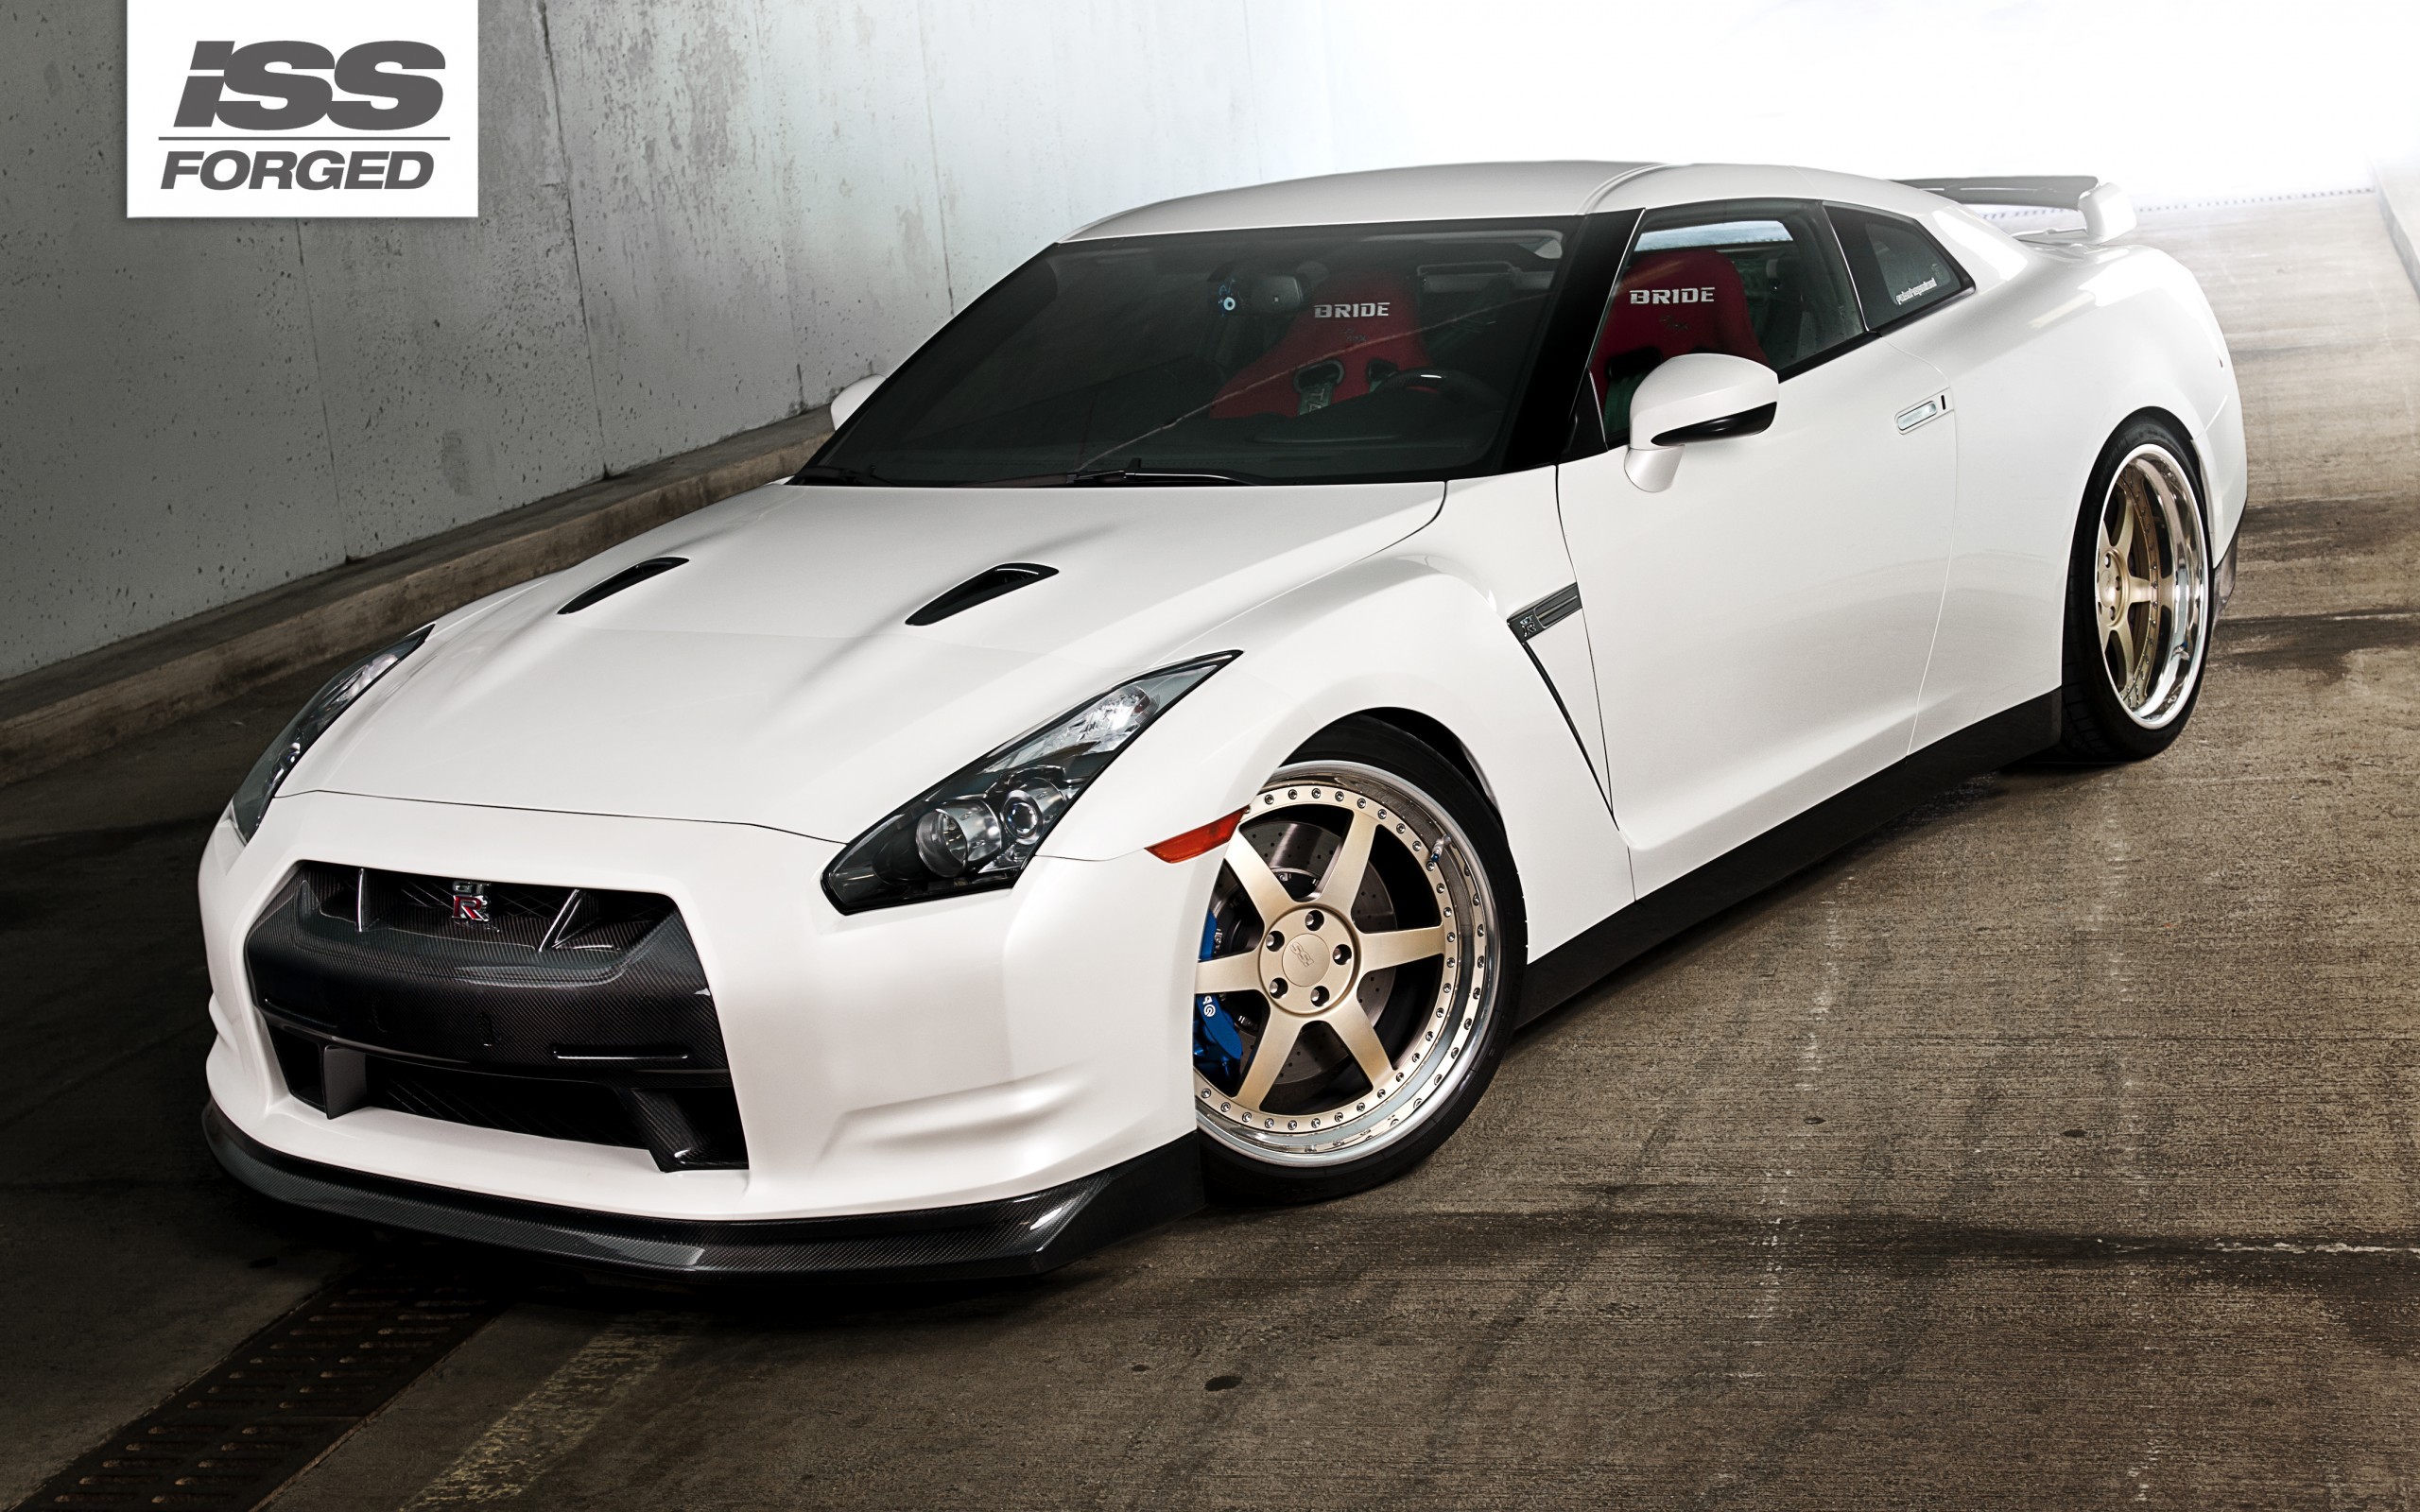 General 2560x1600 white cars car vehicle Nissan GT-R Nissan watermarked